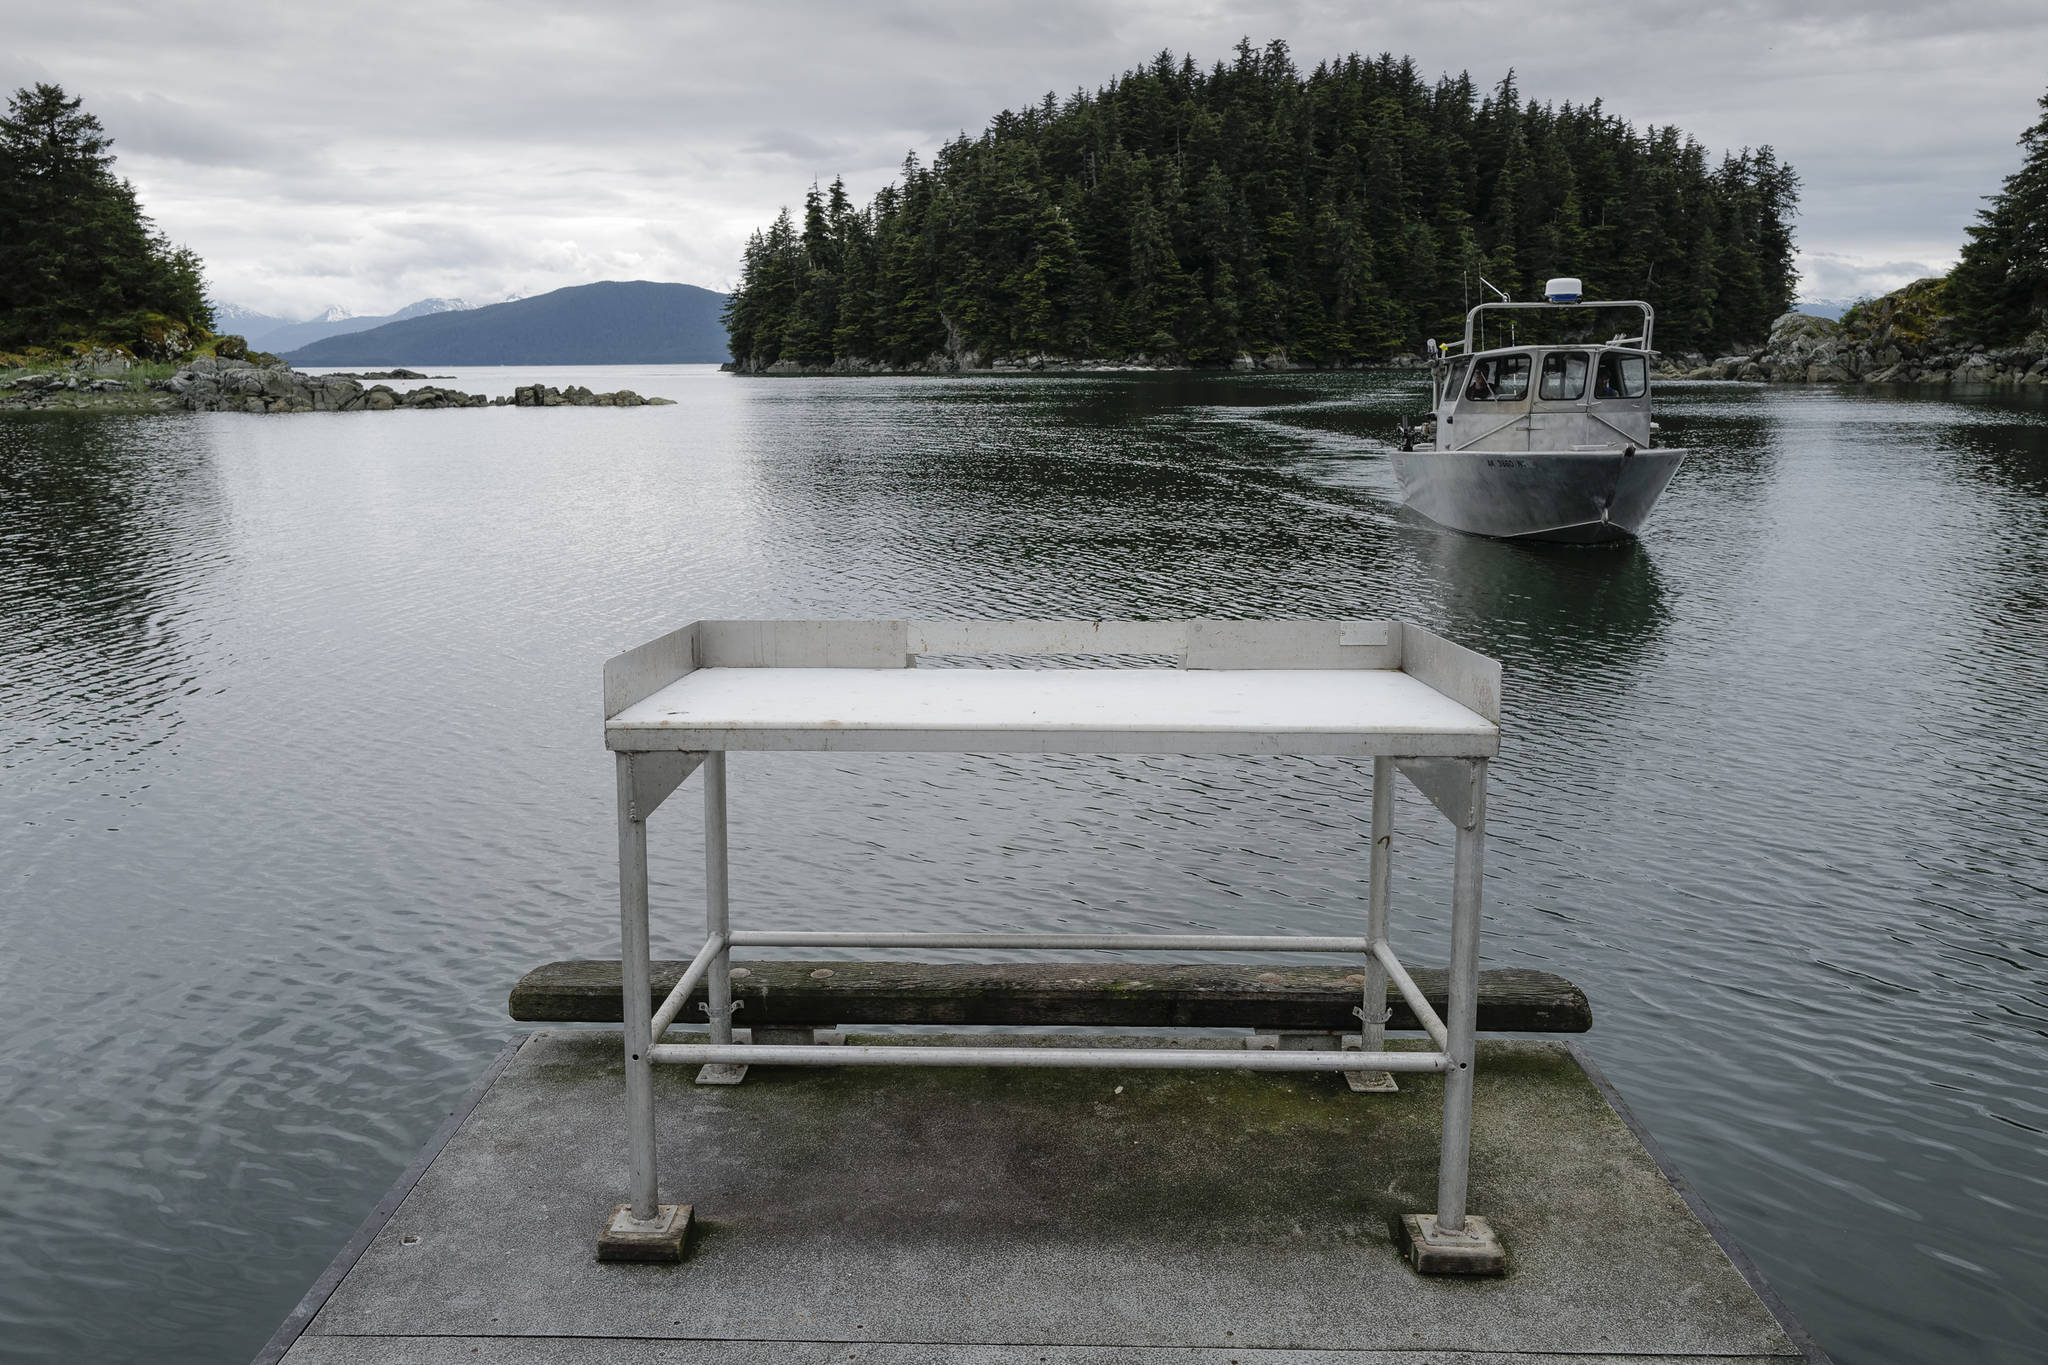 A fisherman approaches the boat launch with its current fish cleaning station at Amalga Harbor on Wednesday, June 19, 2019. (Michael Penn | Juneau Empire)